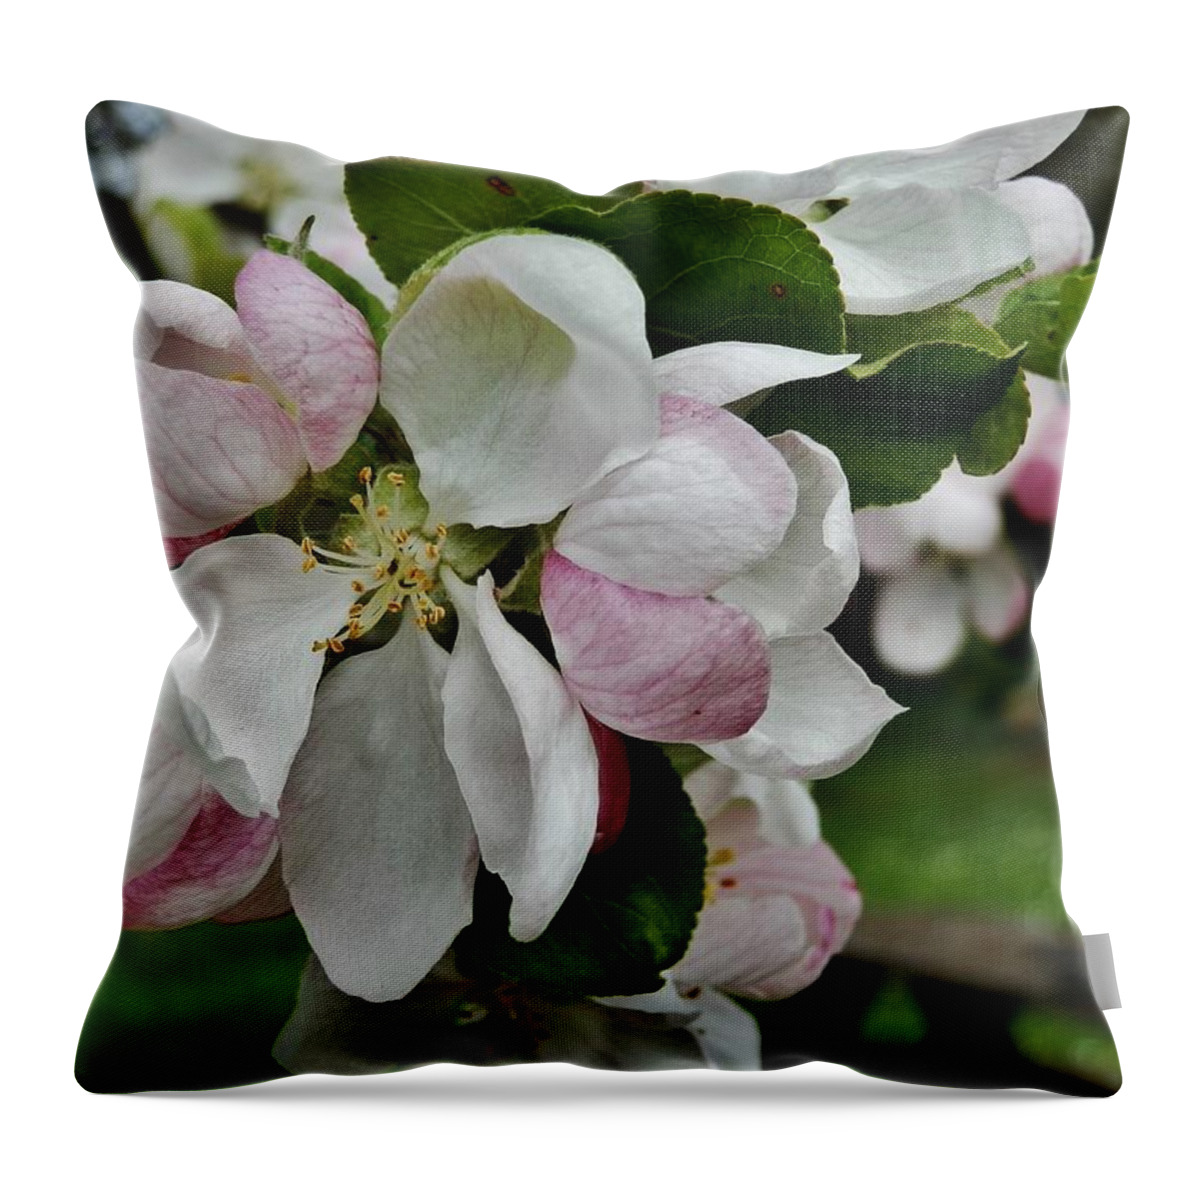 Blossoms Throw Pillow featuring the photograph Apple Blossoms 2 by VLee Watson